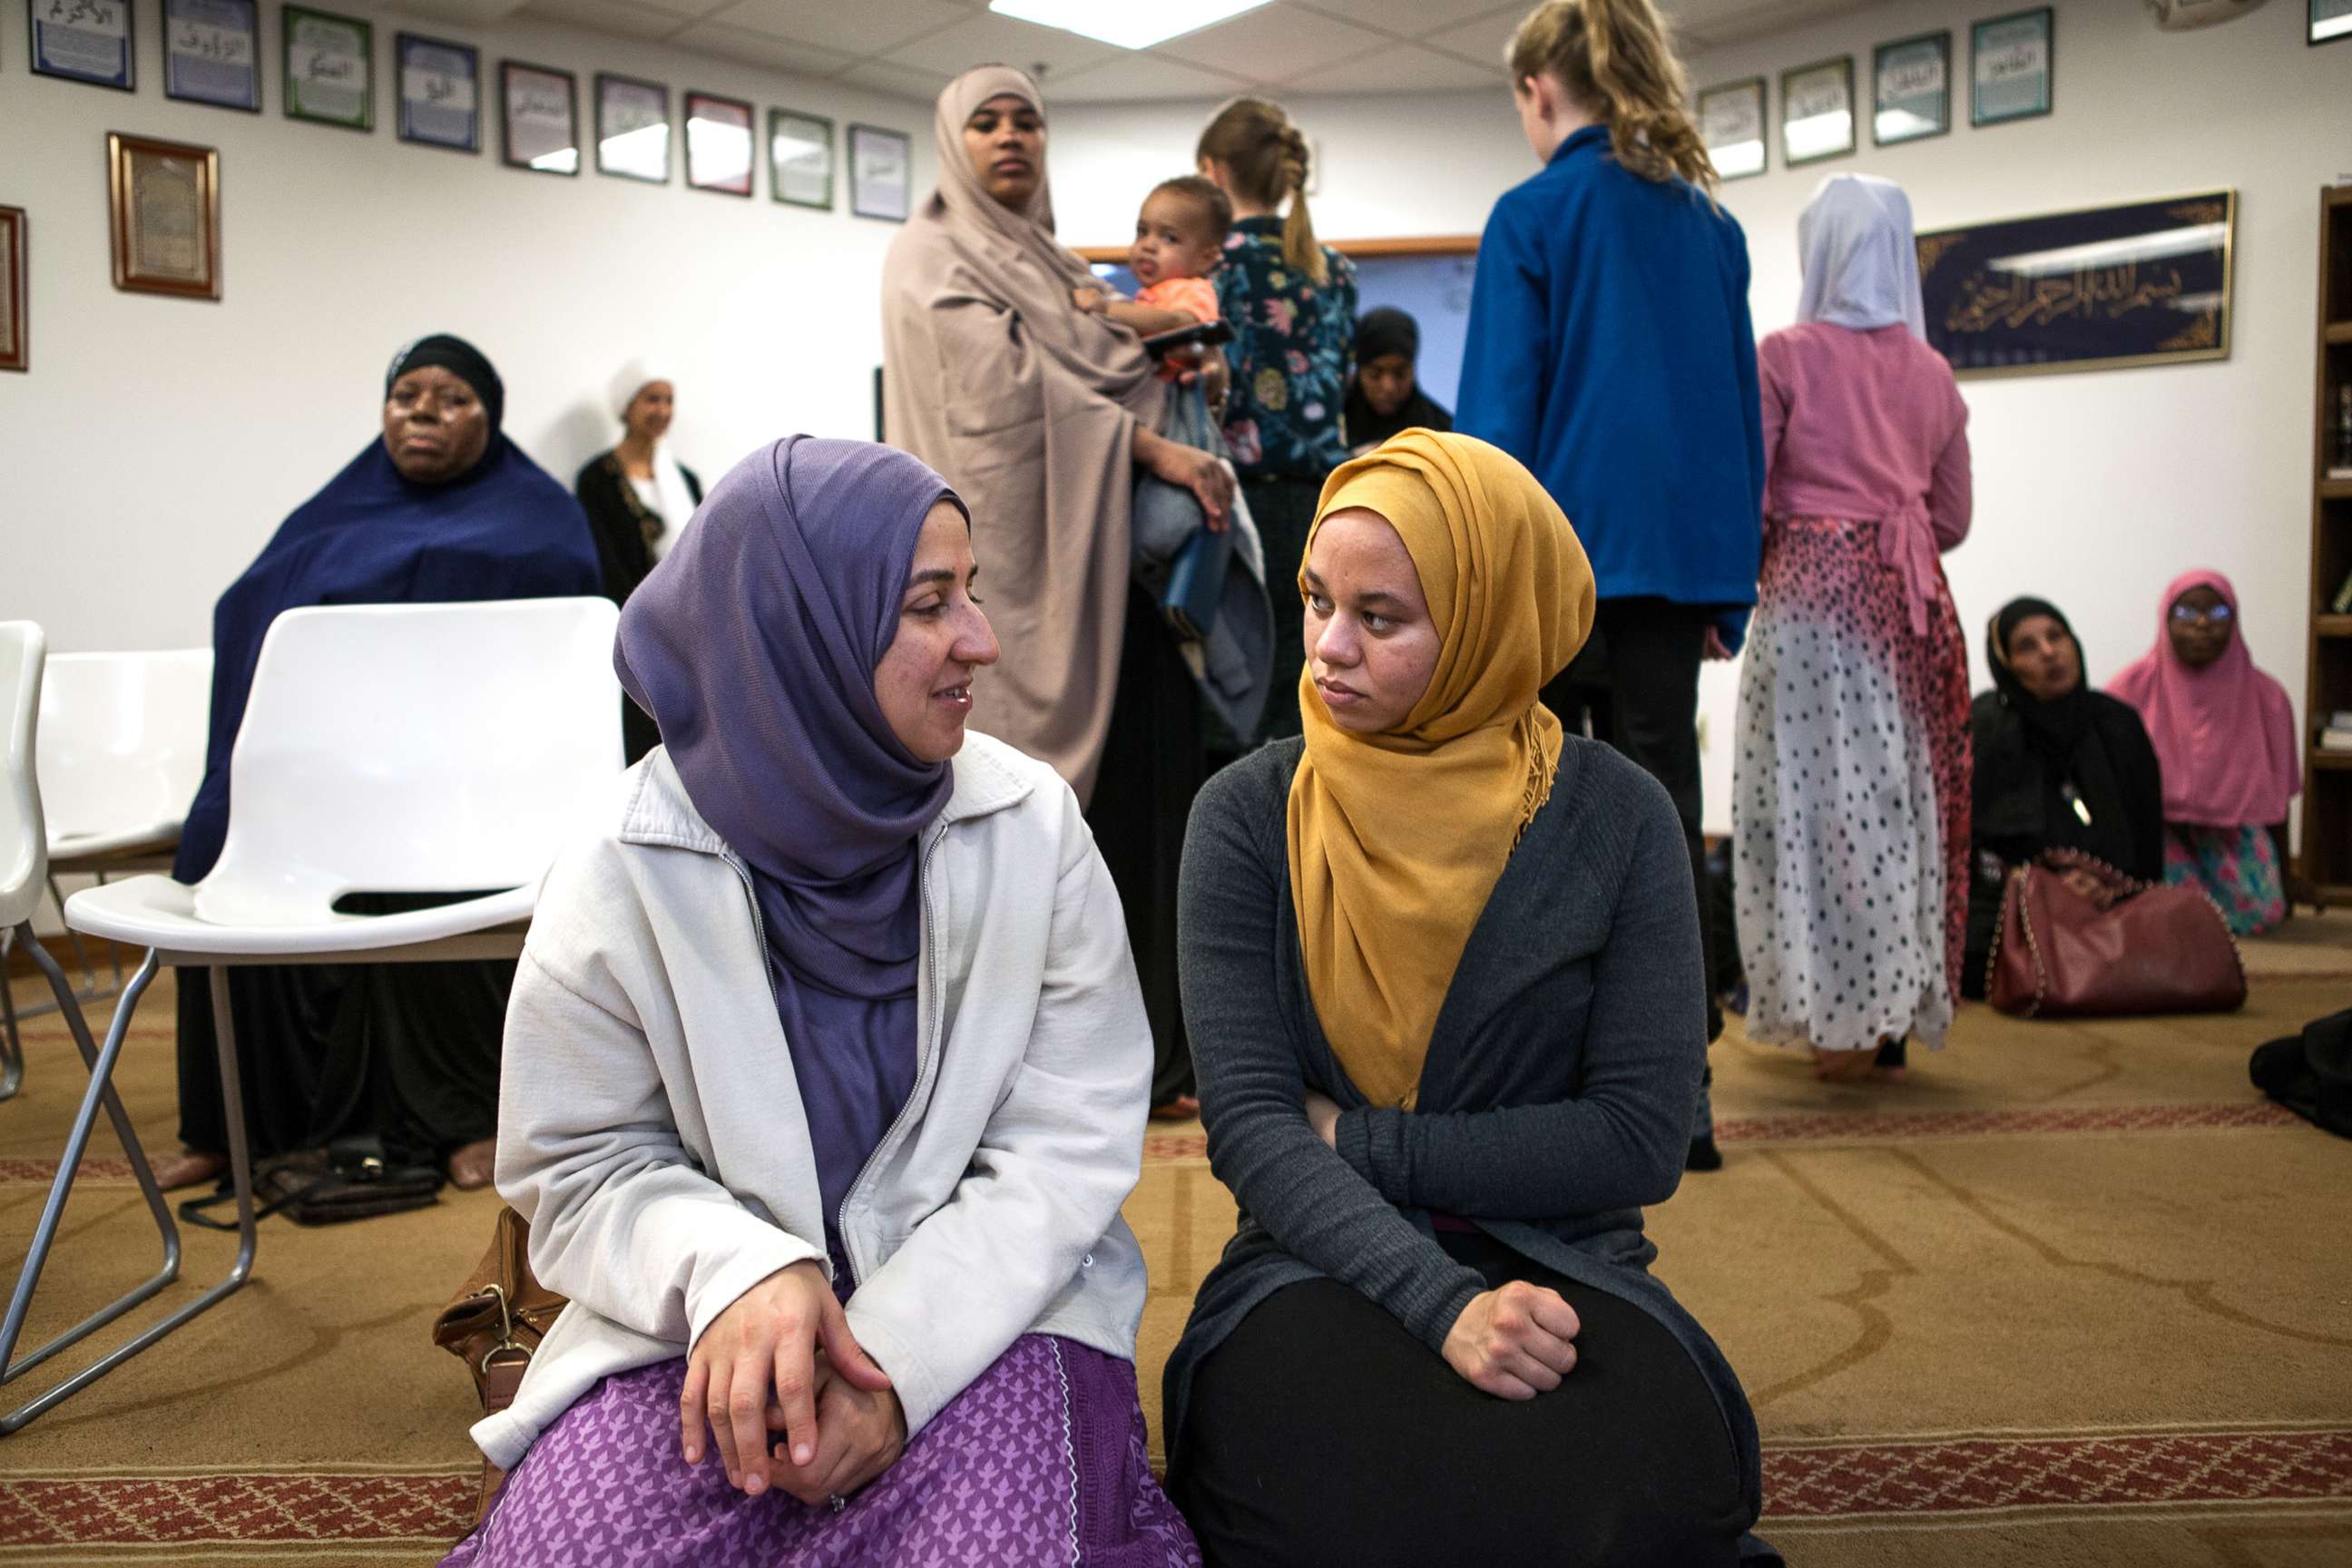 PHOTO: Amaiya attends Friday prayers at a mosque in Minneapolis.